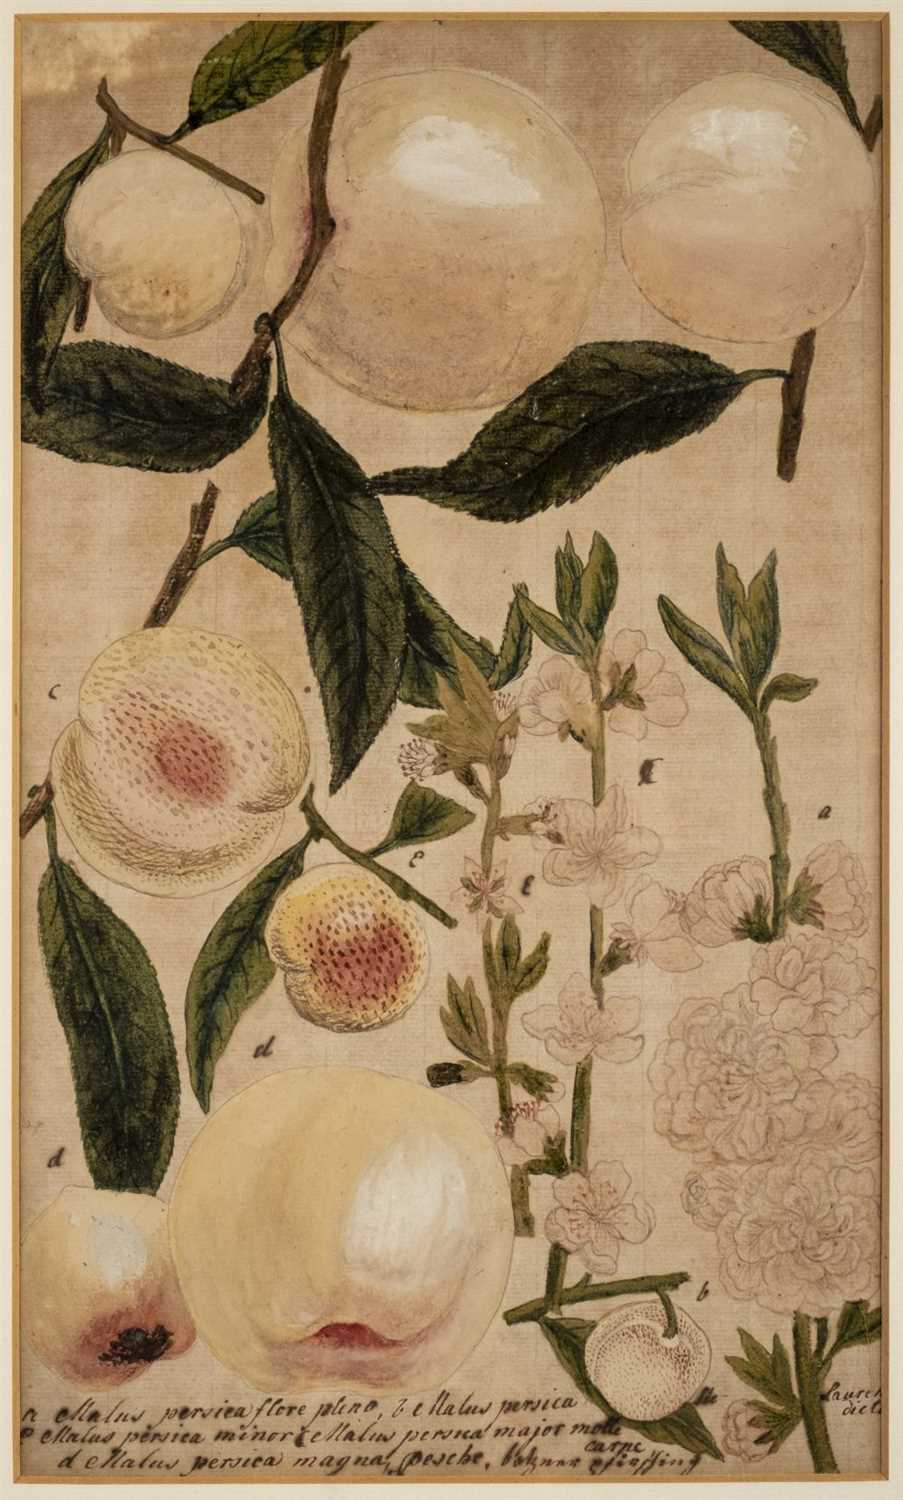 Lot 205 - Botanical Watercolours. Two botanical studies of peach and acorn, late 18th century